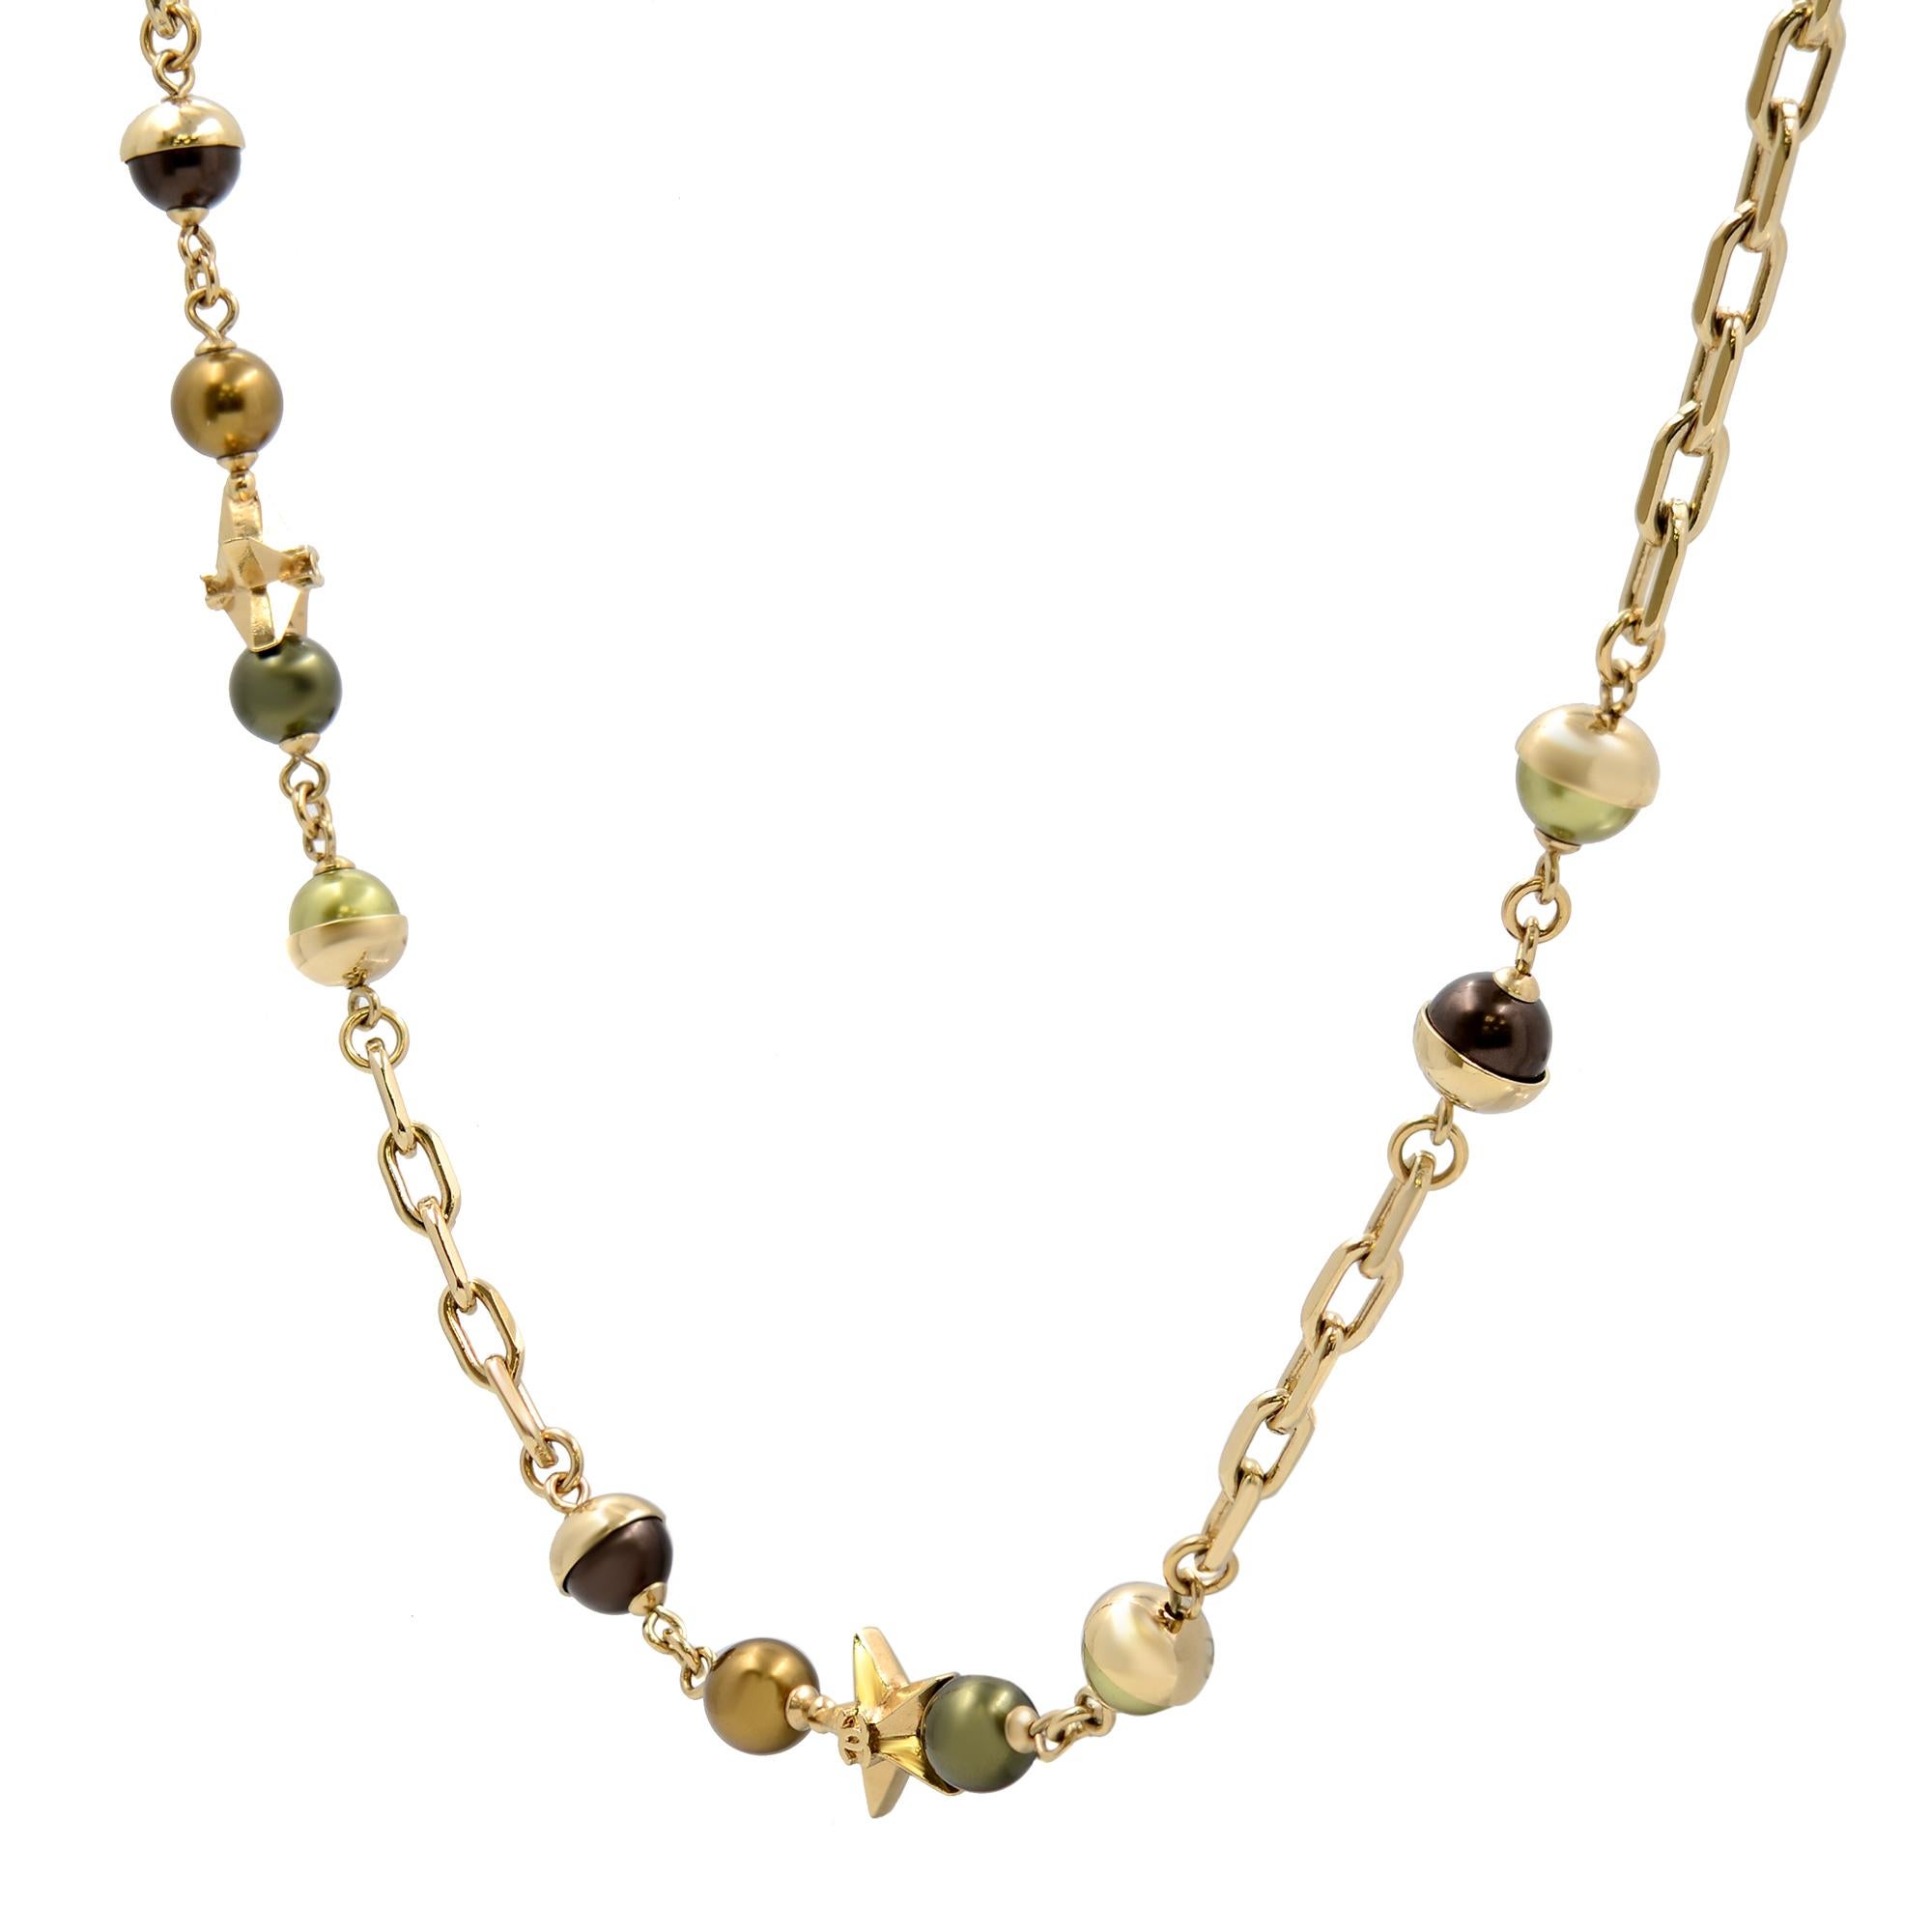 Chanel gold CC logo star olive brown bead long necklace in gold tone. Made in France. Necklace length: 44 inches. A very classic gold plated piece. Excellent pre-owned condition. Original box and papers are not included. 
